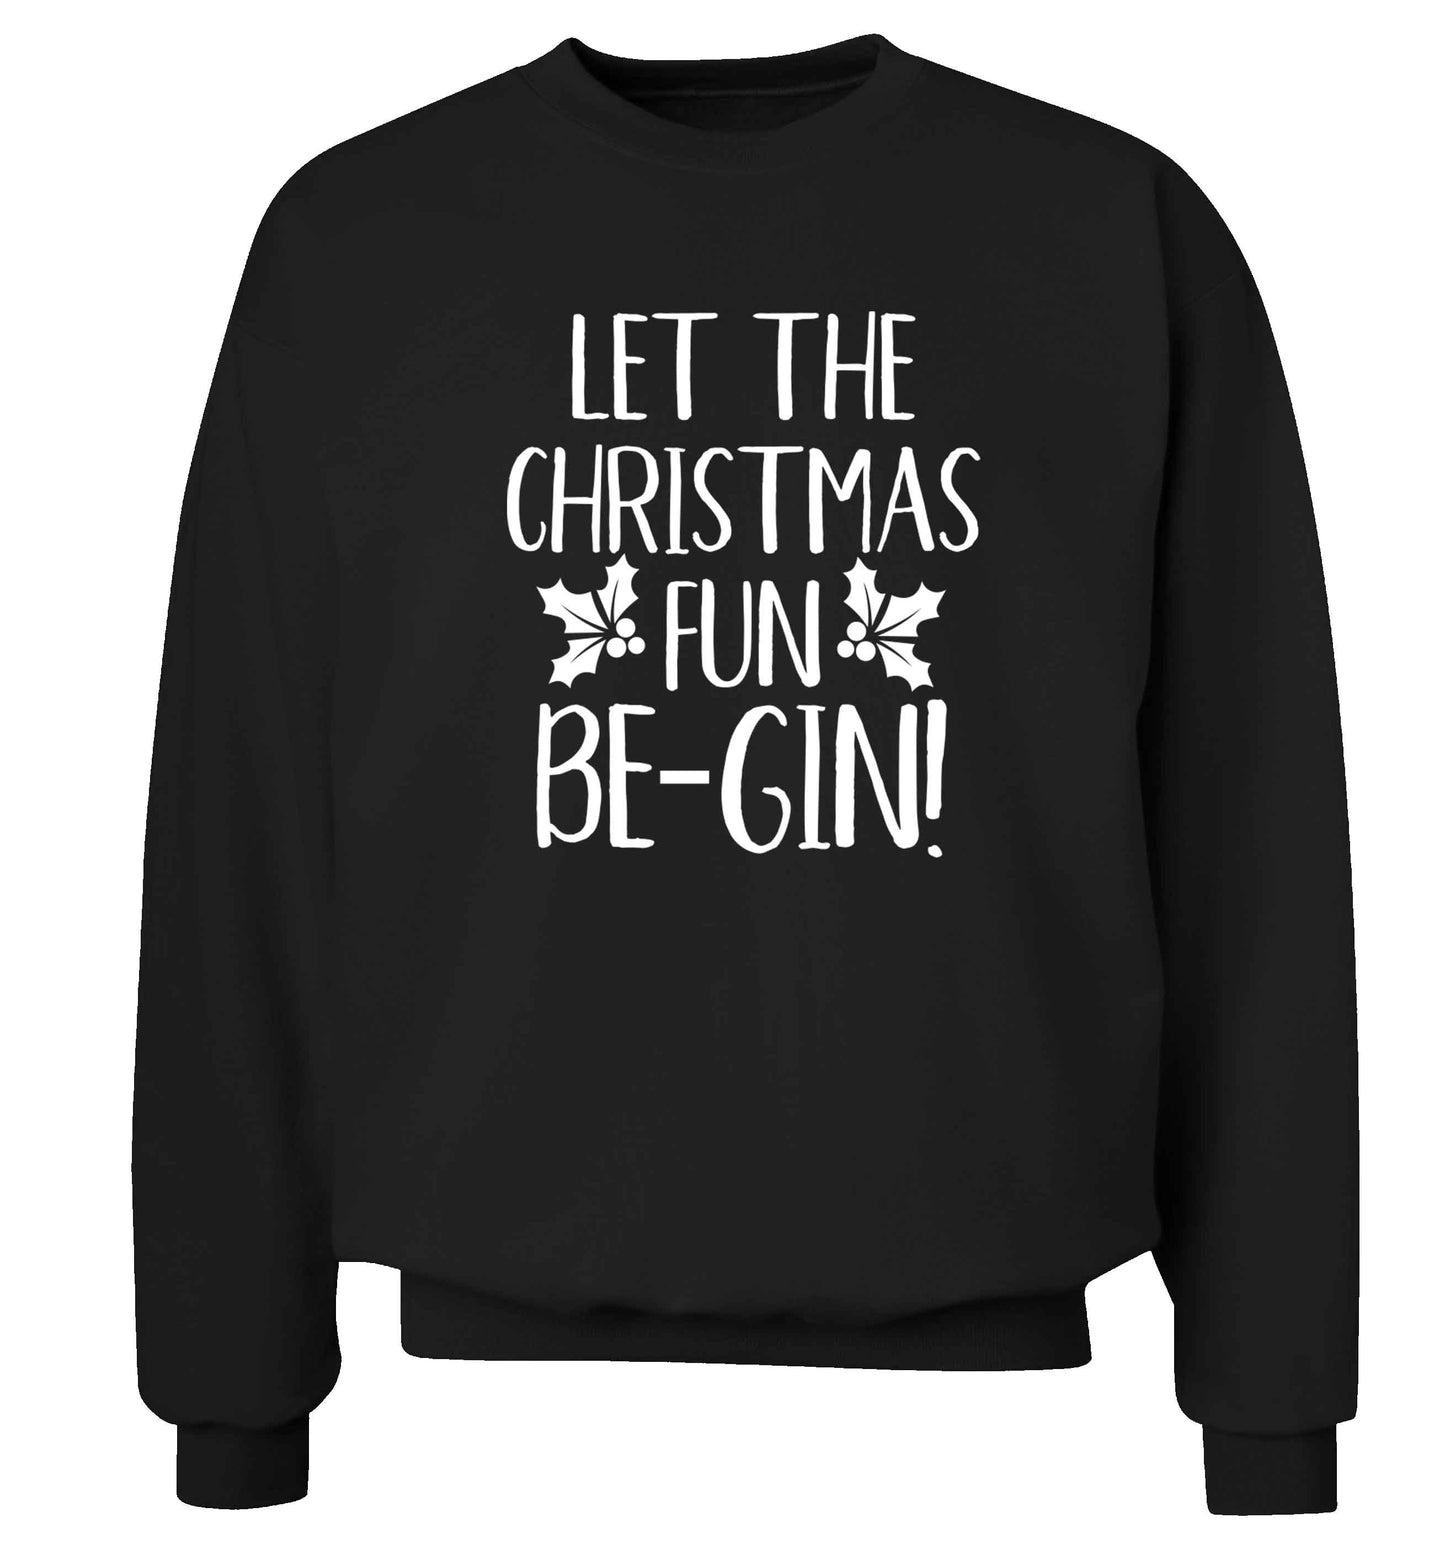 Let the christmas fun be-gin Adult's unisex black Sweater 2XL